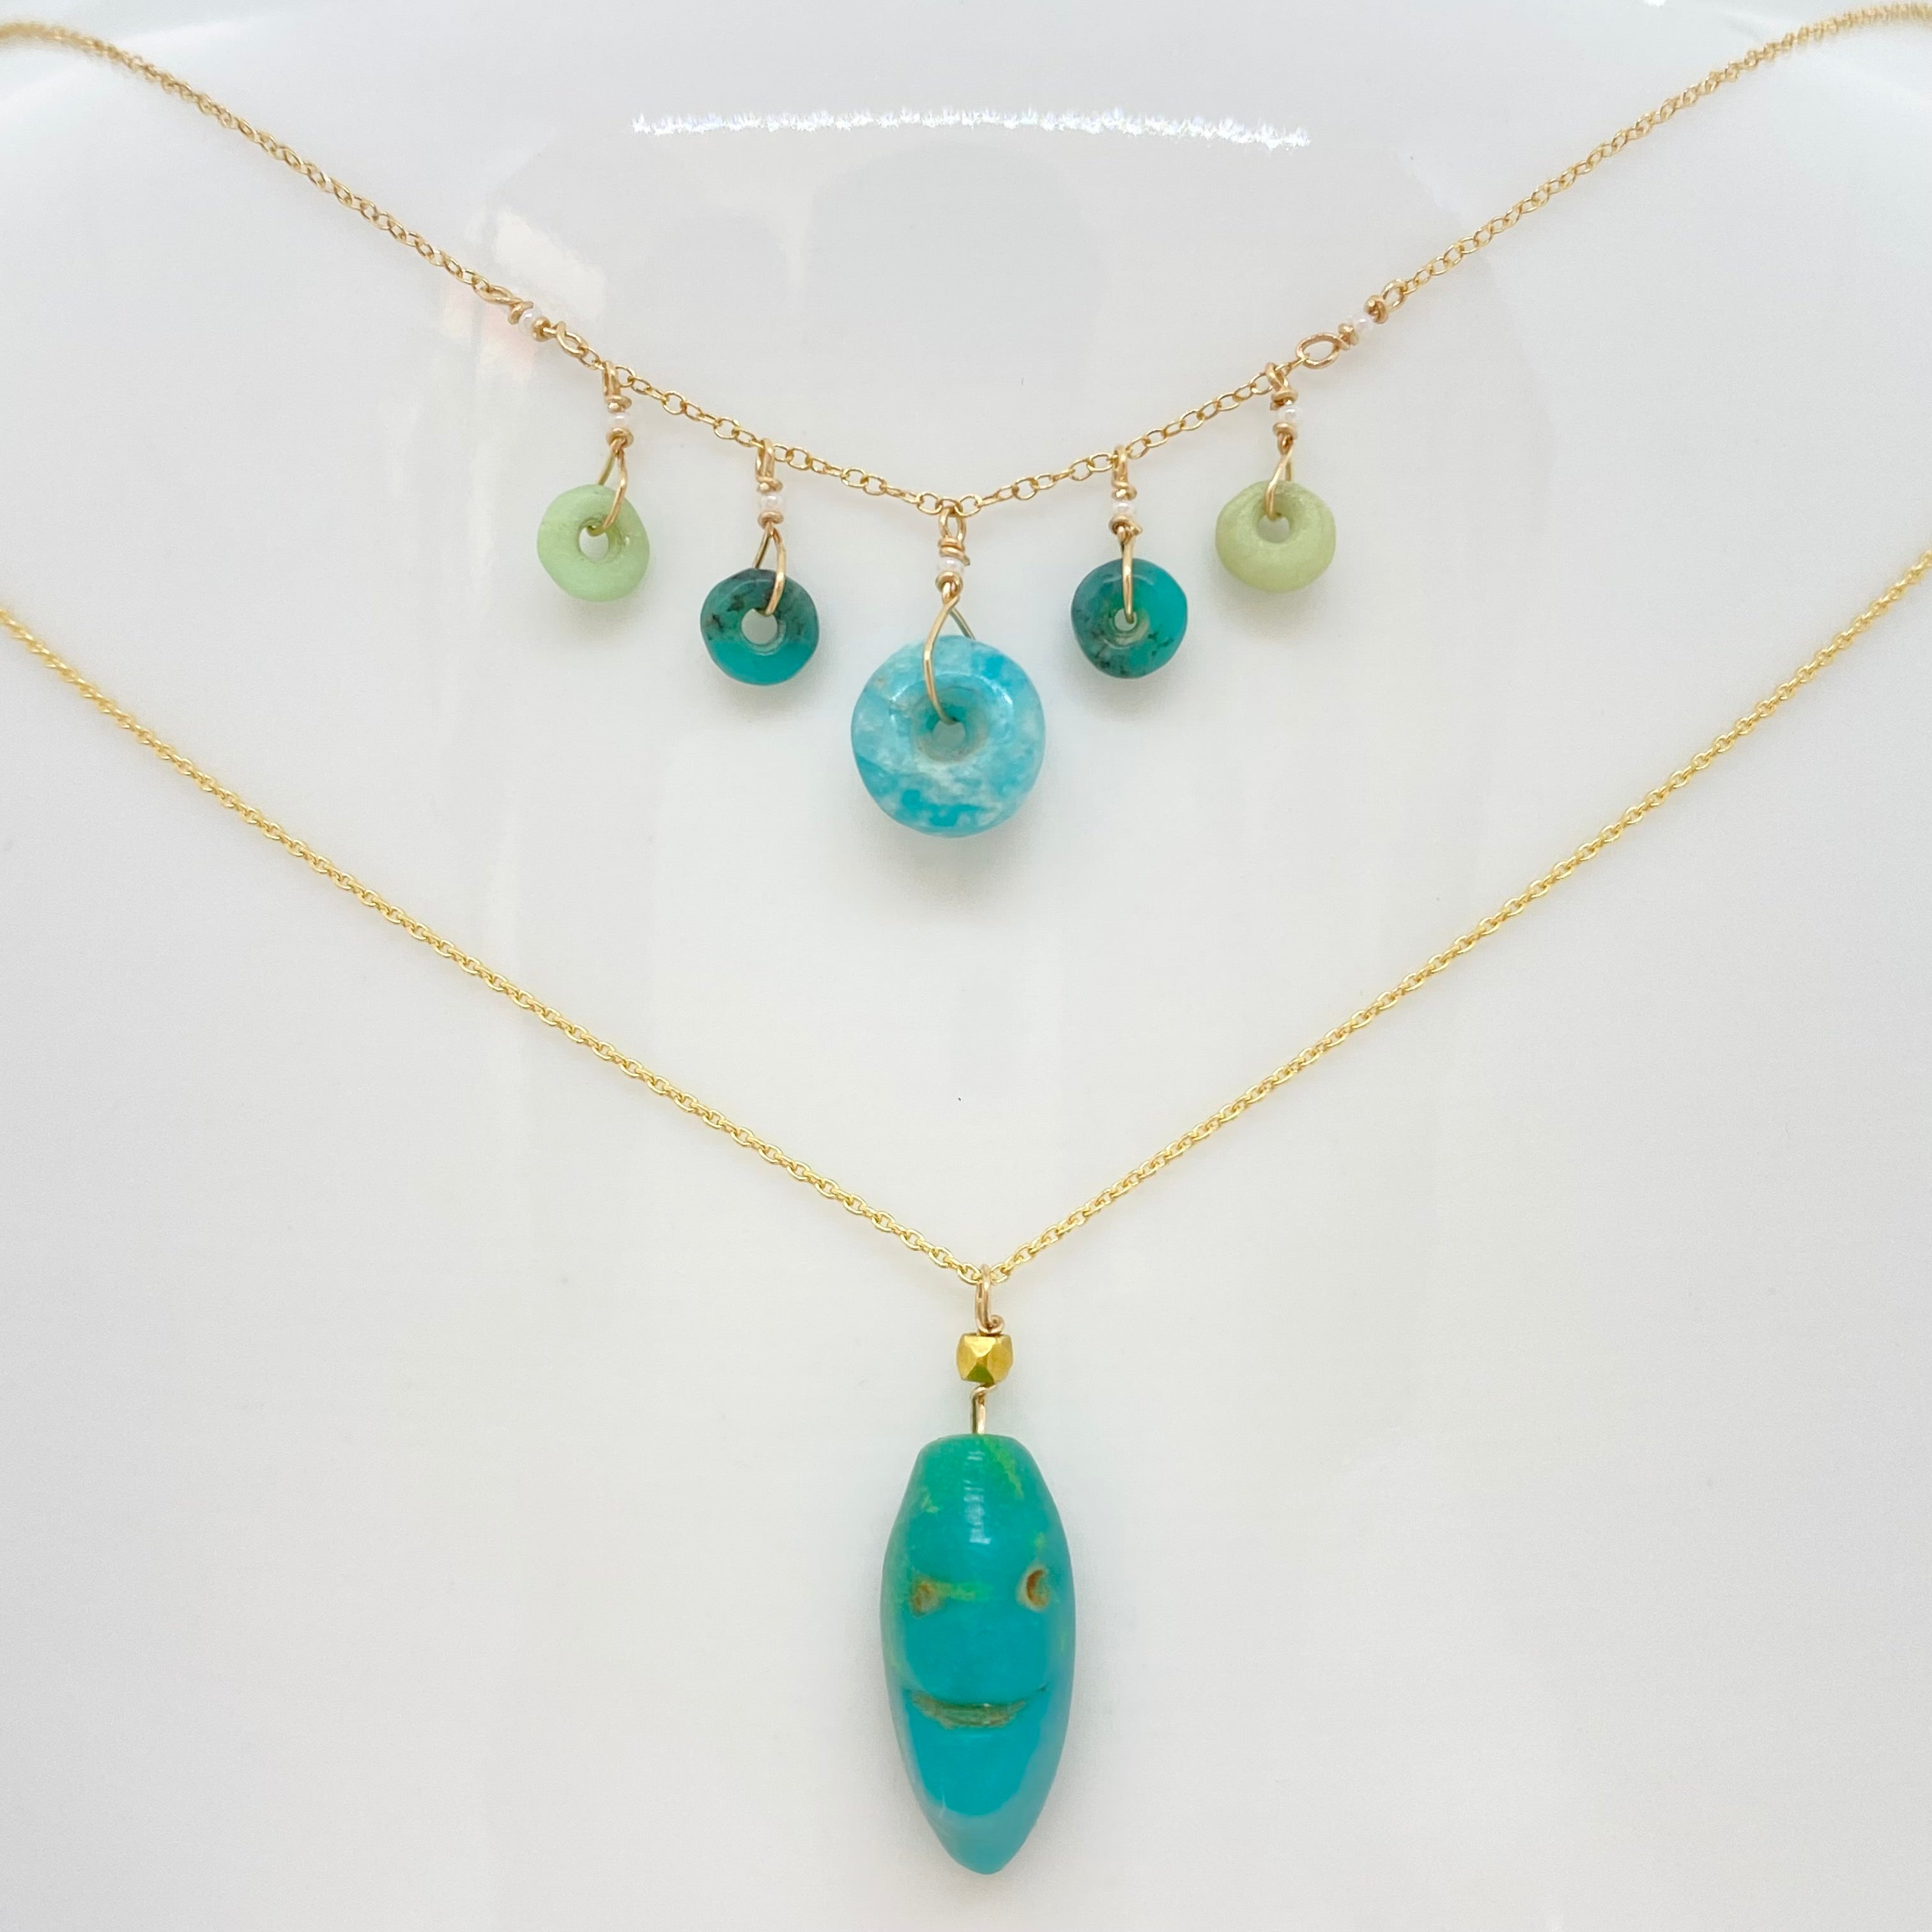 14k Gold Chain Necklace w/ Pre-Columbian Chrysoprase, 18k Gold Nugget & Antique Italian Beads